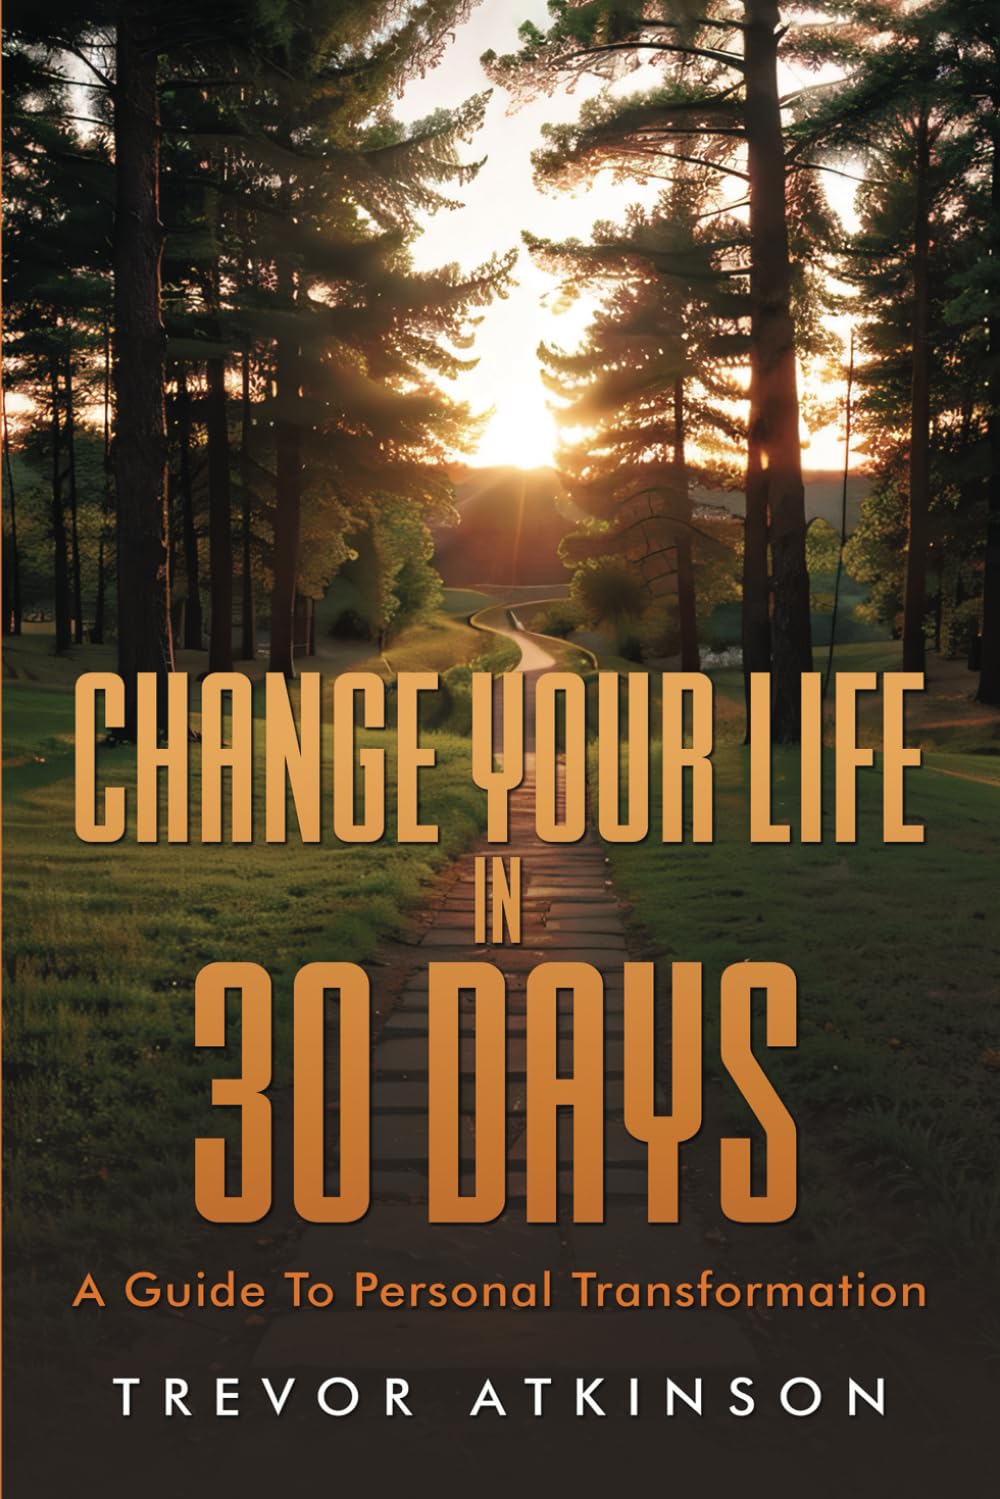 Trevor Atkinson's New Book "Change Your Life in 30 Days: A Guide to Personal Transformation" Offers a Practical Roadmap to Transformative Change